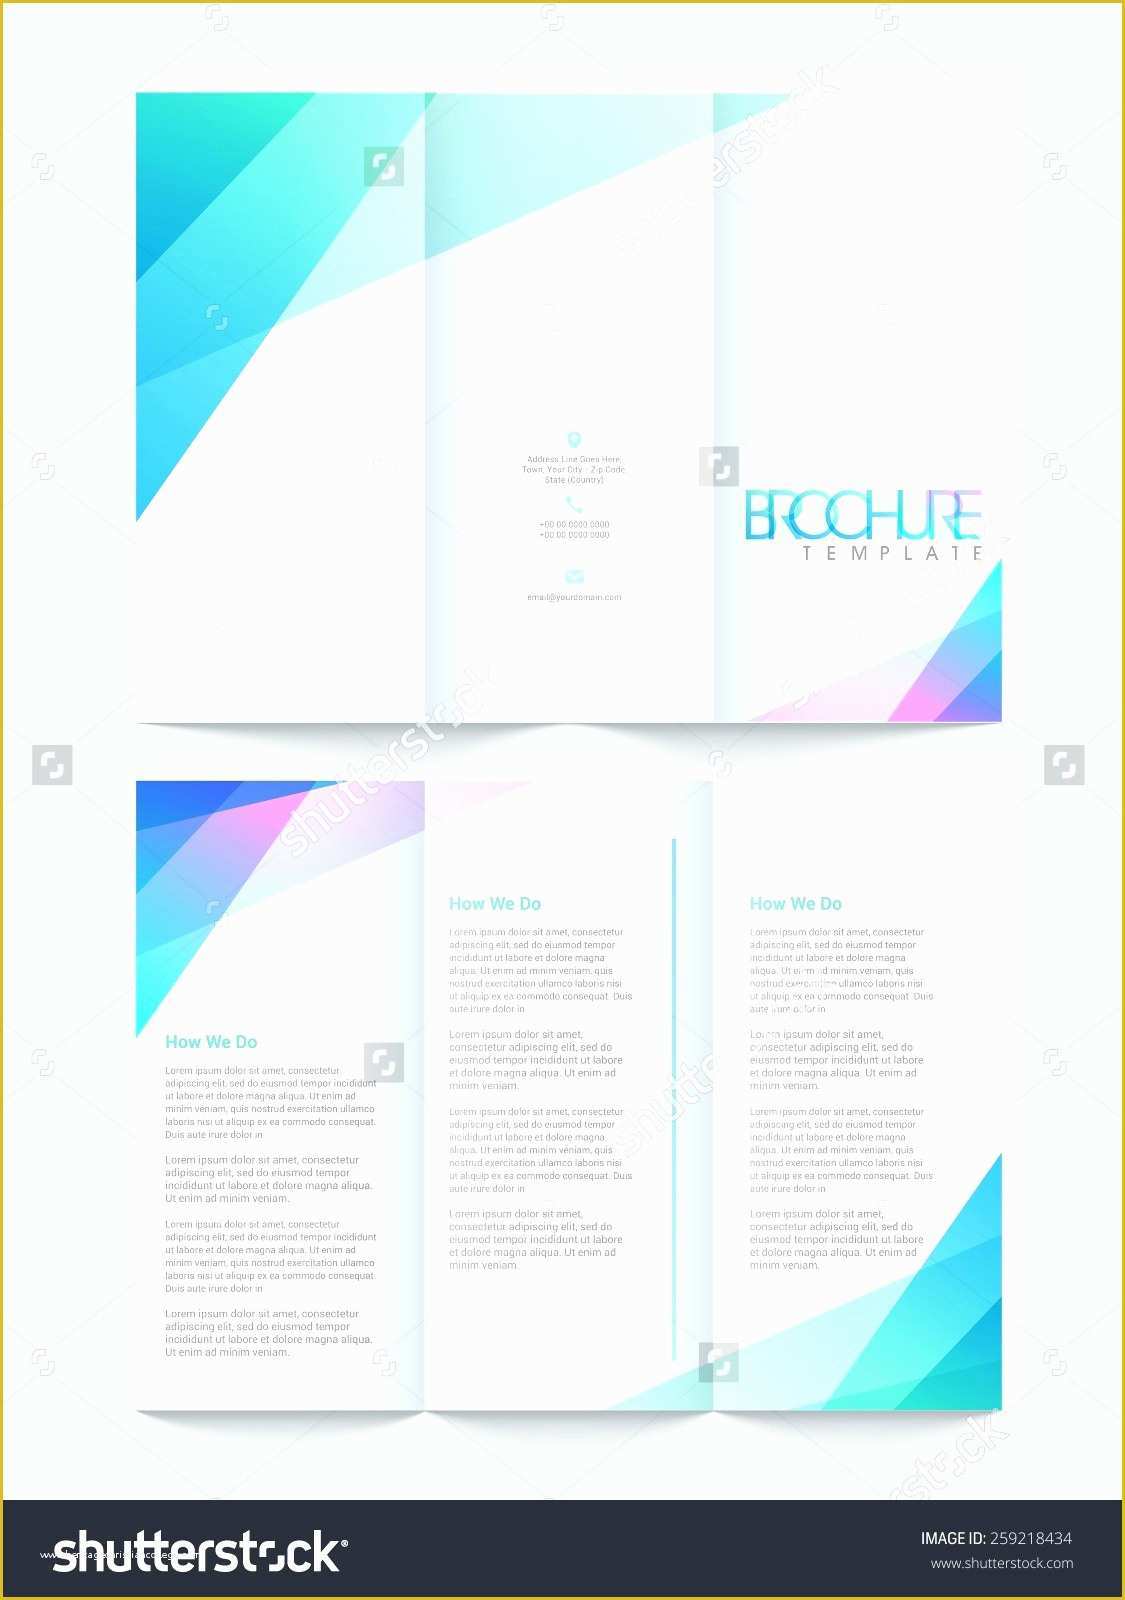 Free Downloadable Brochure Templates for Word Of 50 Inspirational Free Tri Fold Brochure Template Word